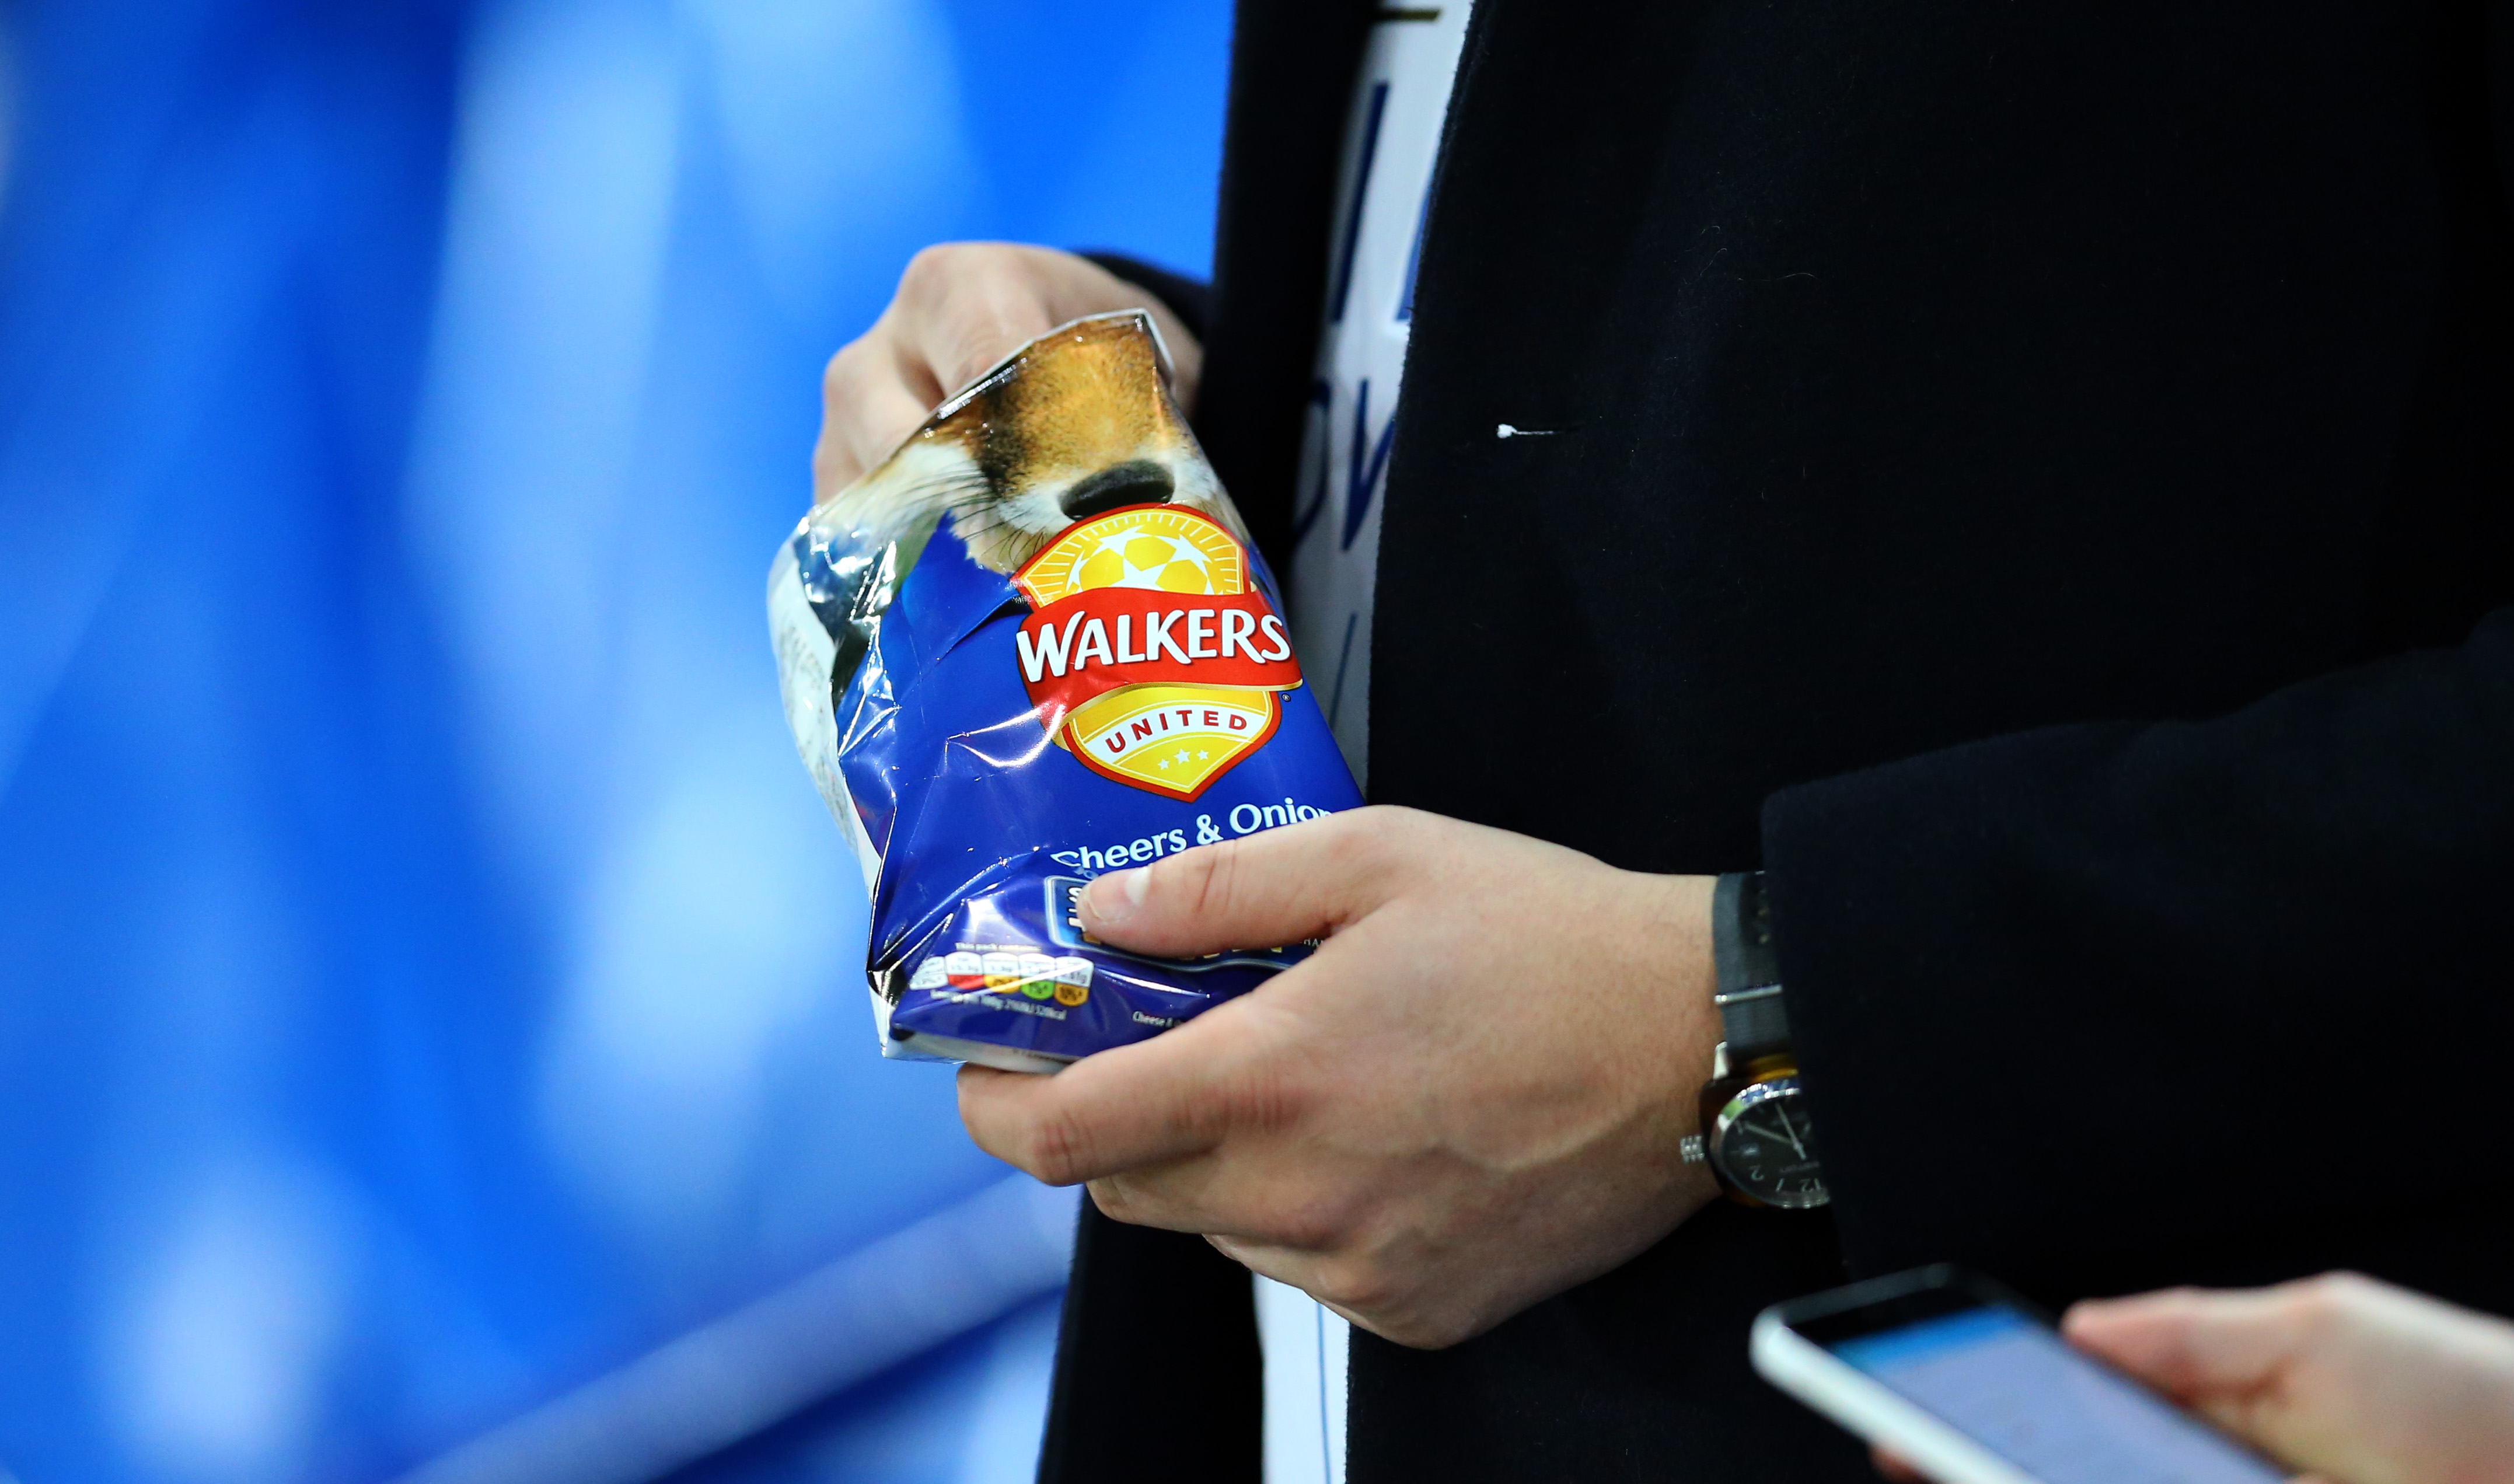 A Walkers packet of Cheers and Onion crisps during the UEFA Champions League Round of 16 second leg match between Leicester City and Sevilla FC at The King Power Stadium on March 14, 2017 in Leicester, United Kingdom. (Catherine Ivill - AMA/Getty Images)